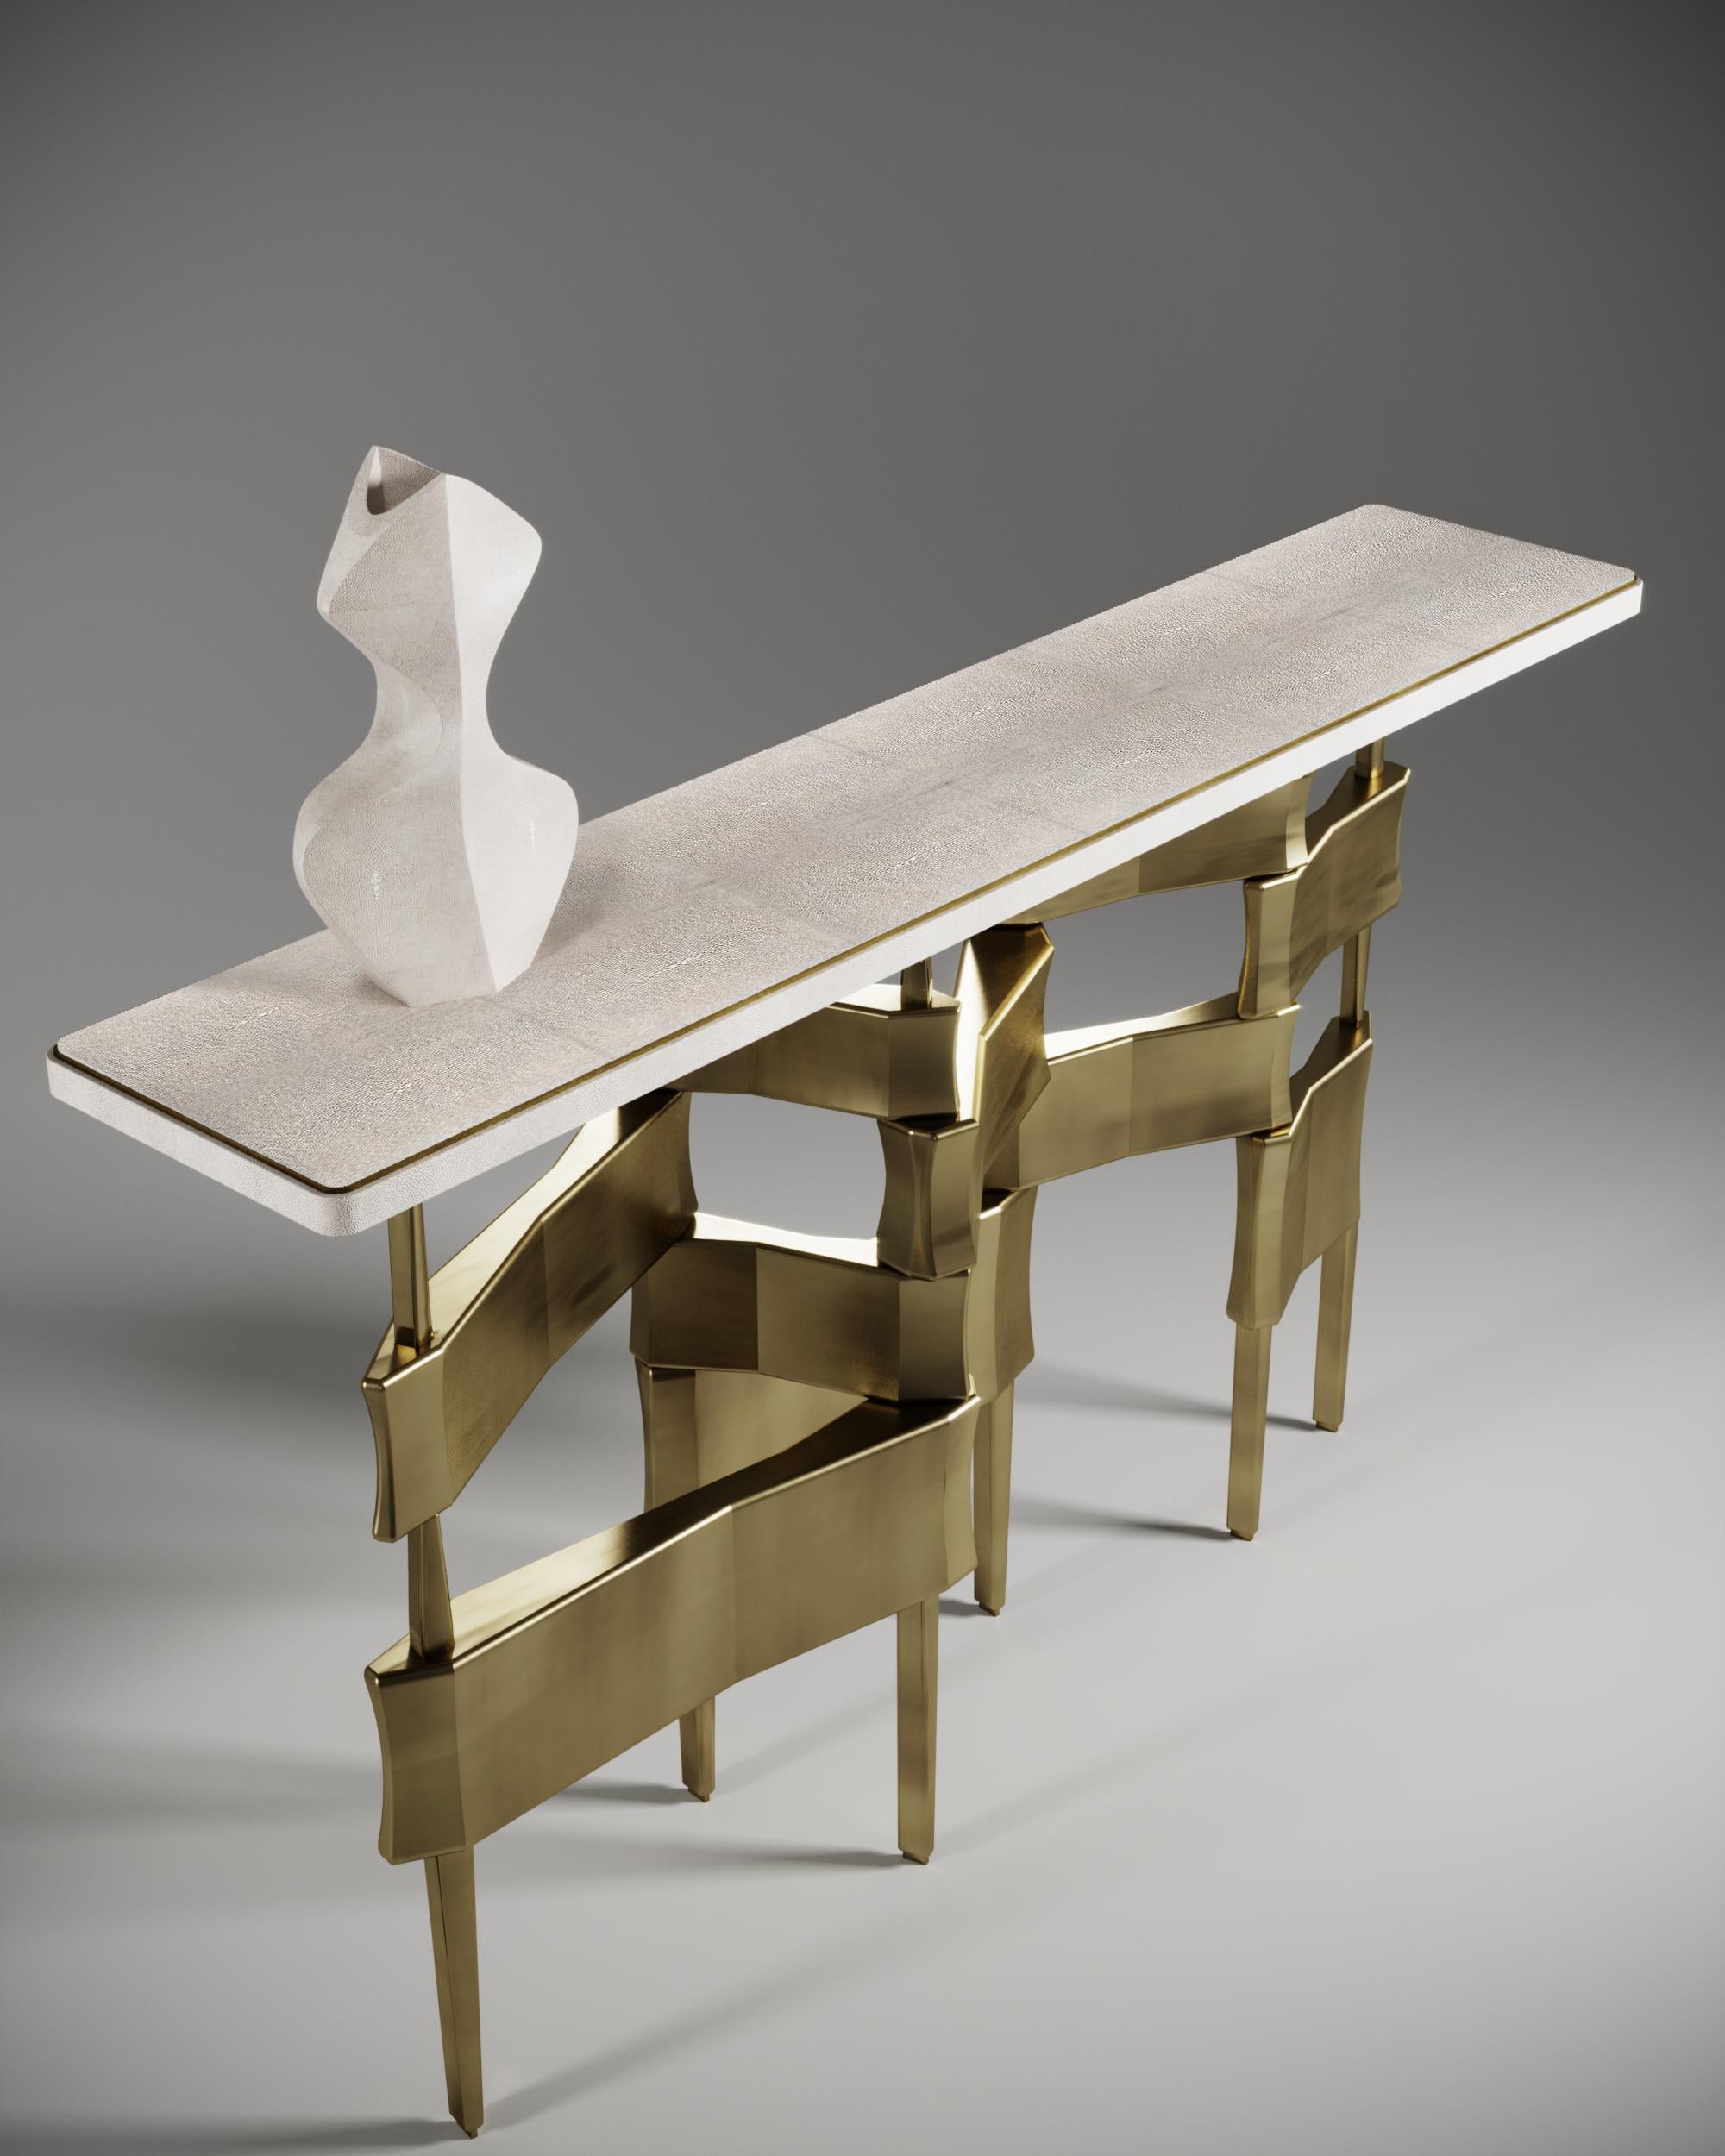 Quartz Console Table with Polished Stainless Steel Details by Kifu Paris For Sale 2